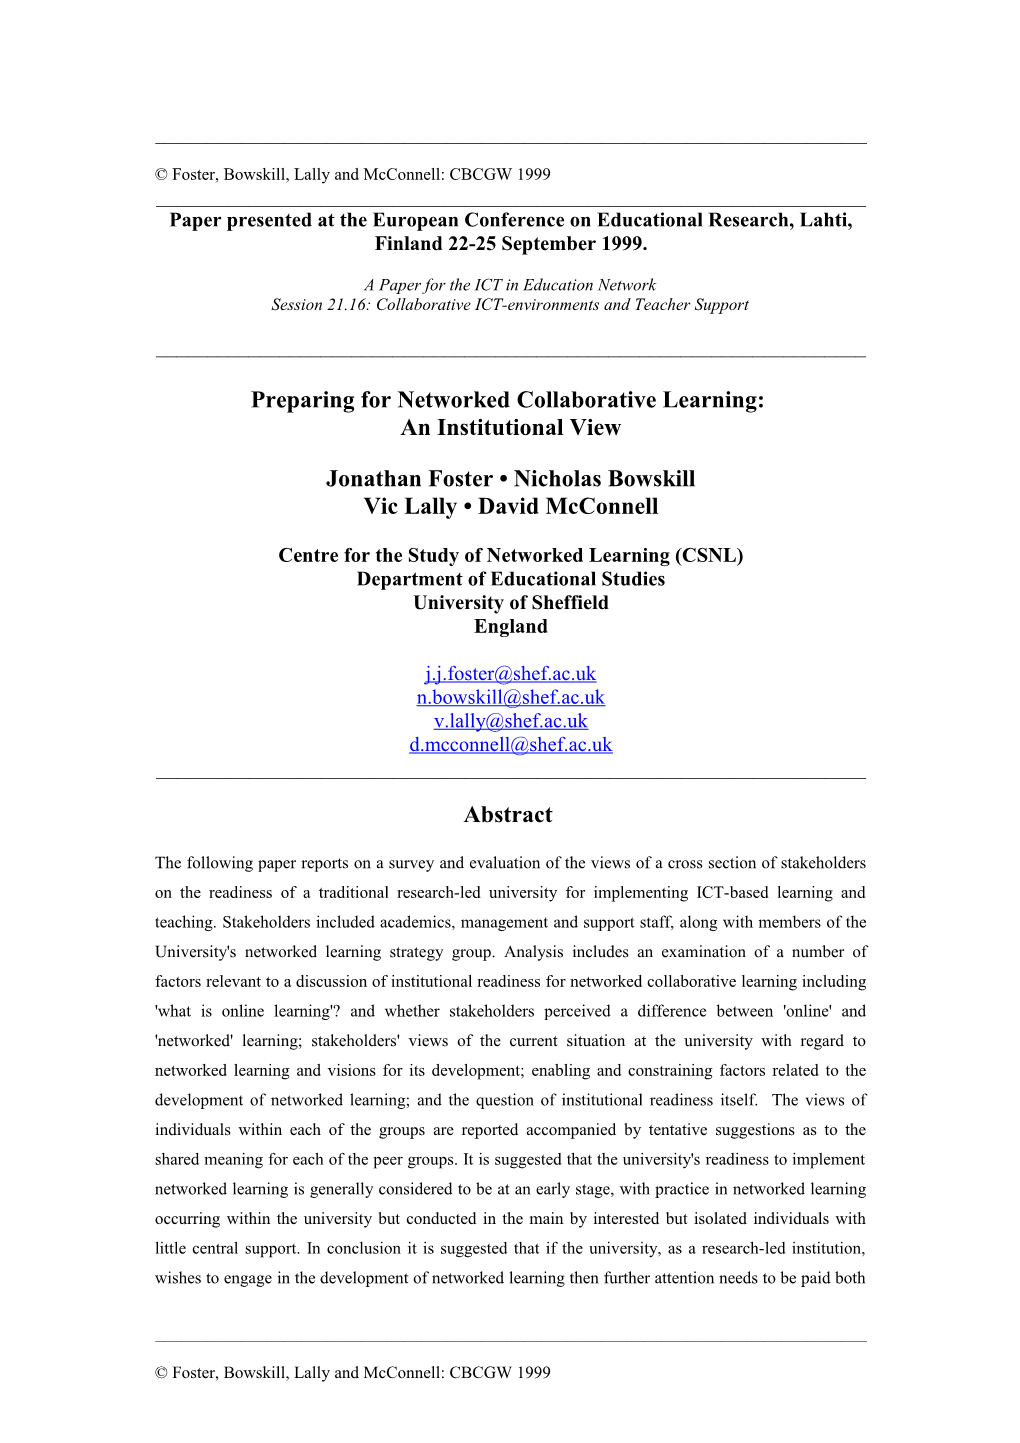 Preparing for Networked Collaborative Learning: an Institutional View Draft Paper for European